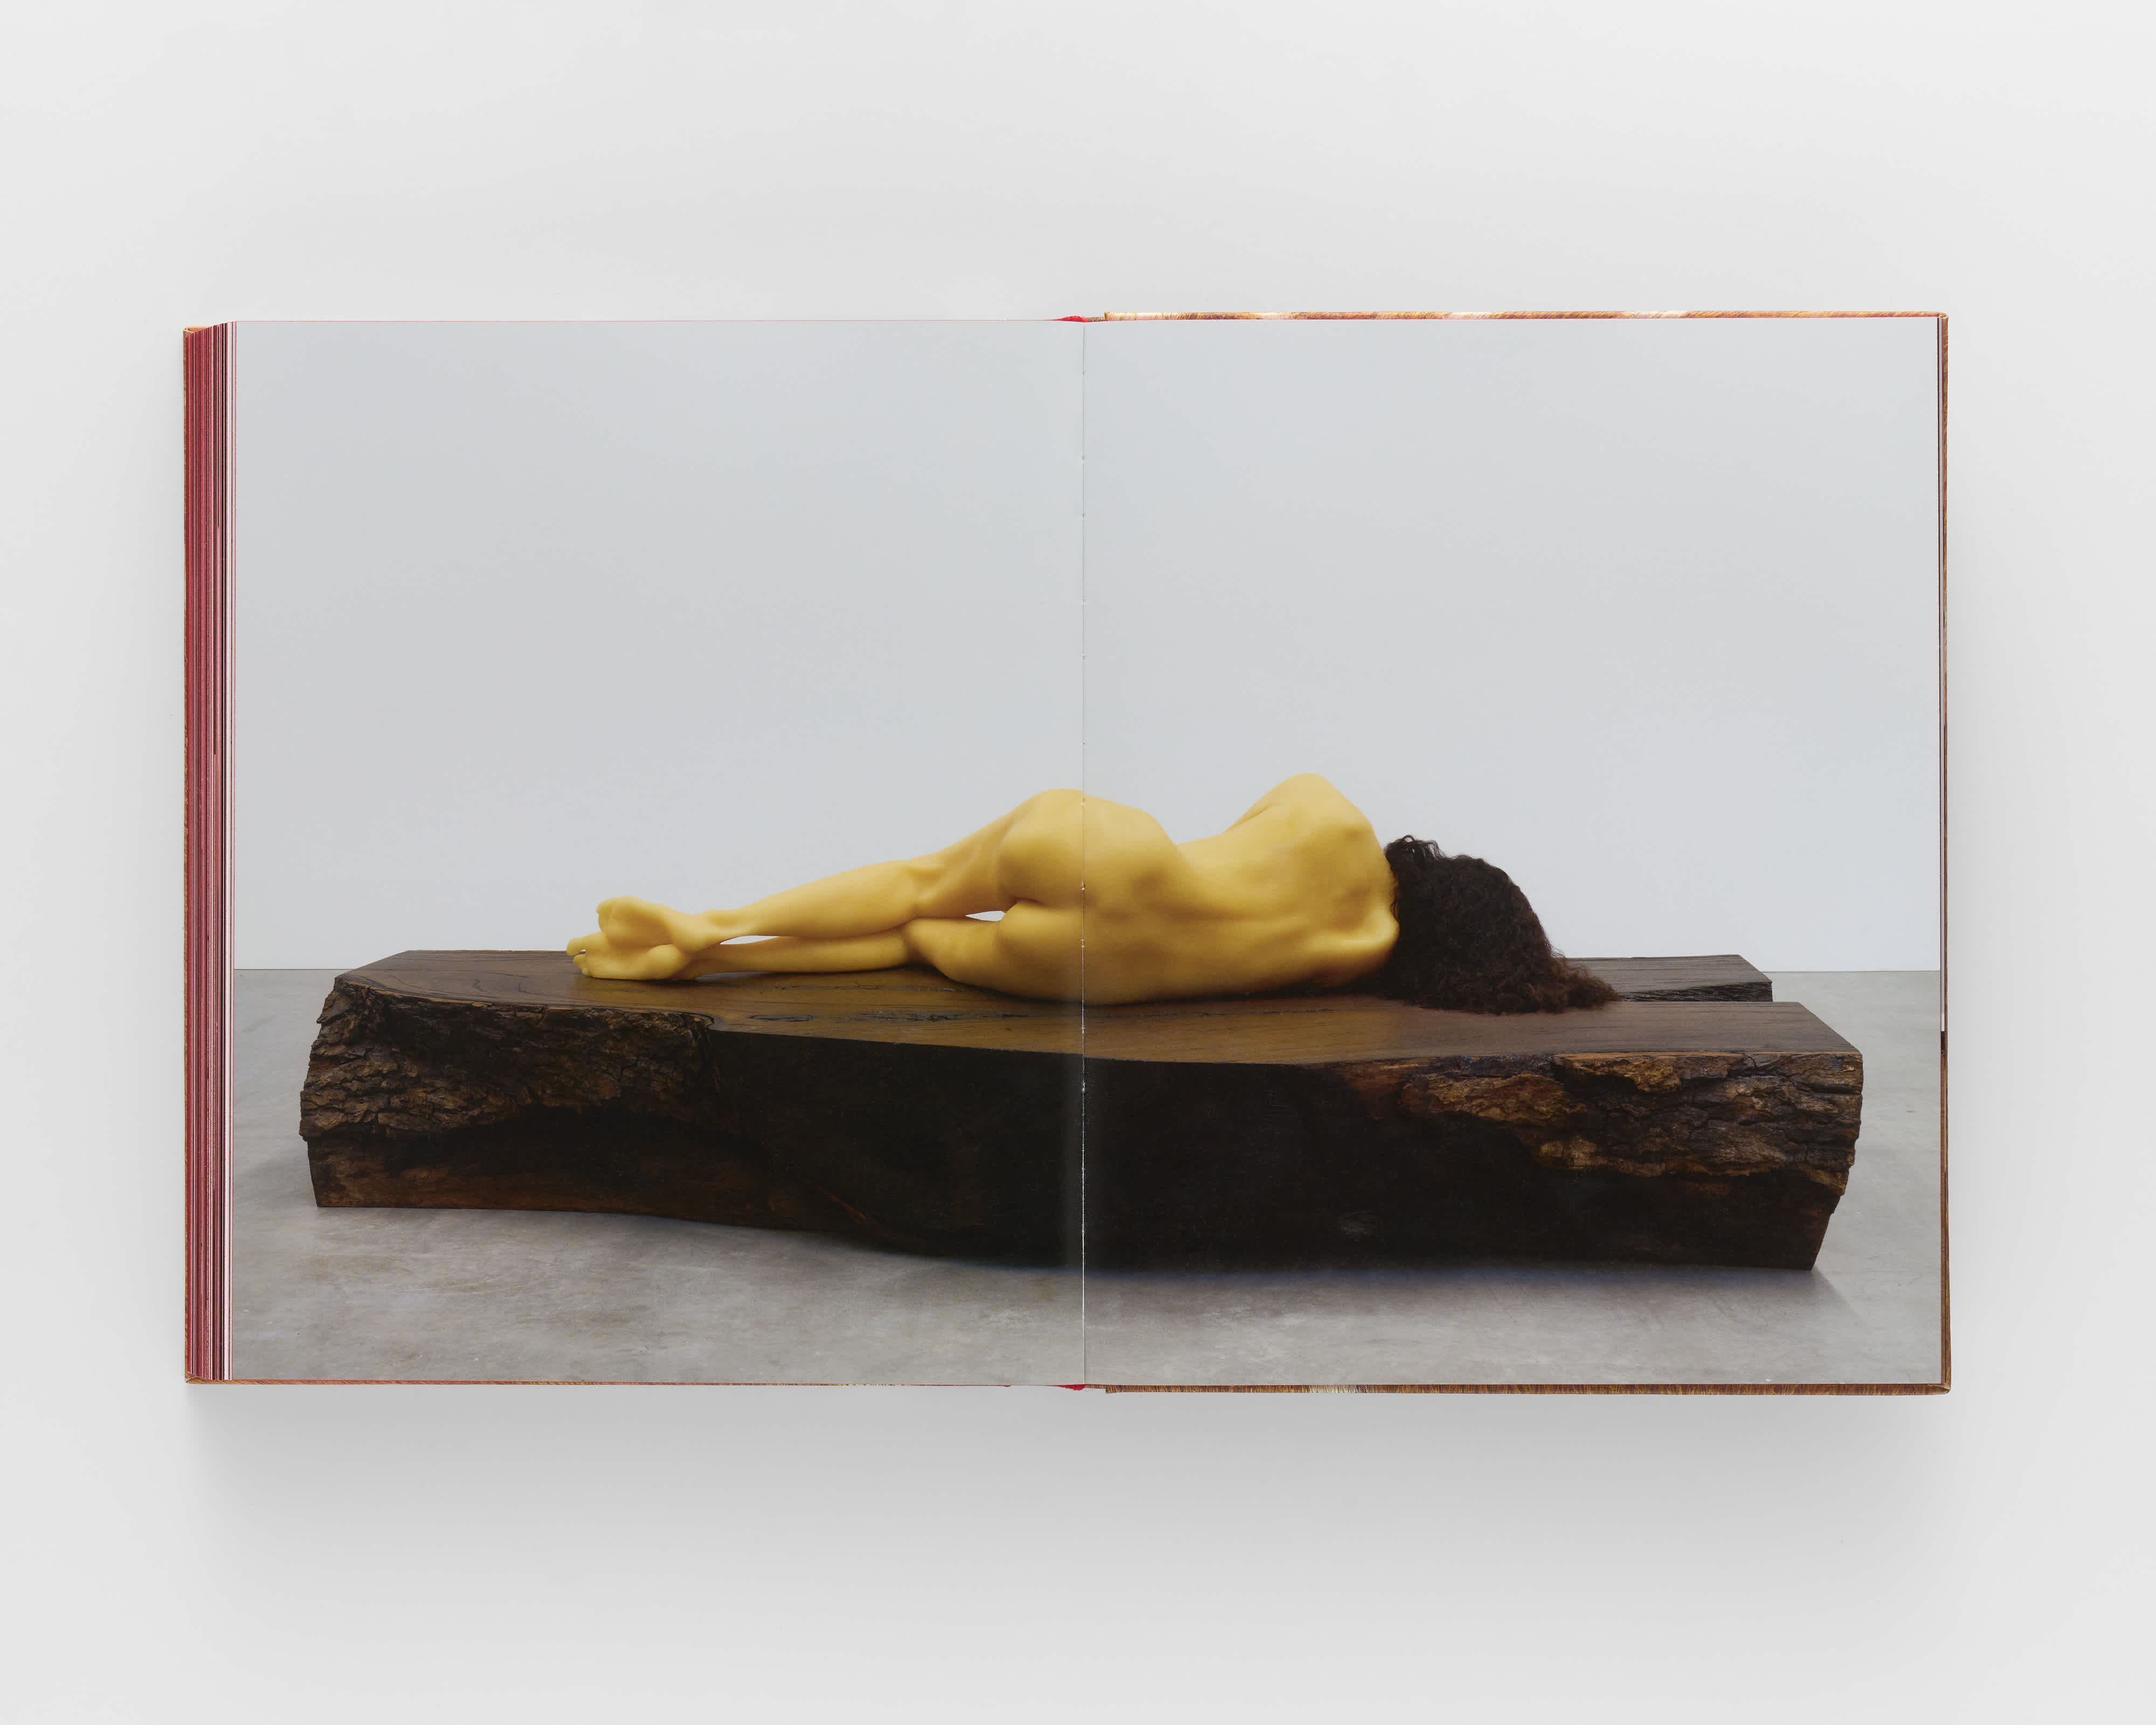 An open book with a full-bleed centerfold image of a sculpture of a human body laying on top of a slab of dark wood. The body is cast in yellow-wax. Its back faces away from the viewer and its only feature is a crop of short black hair. 